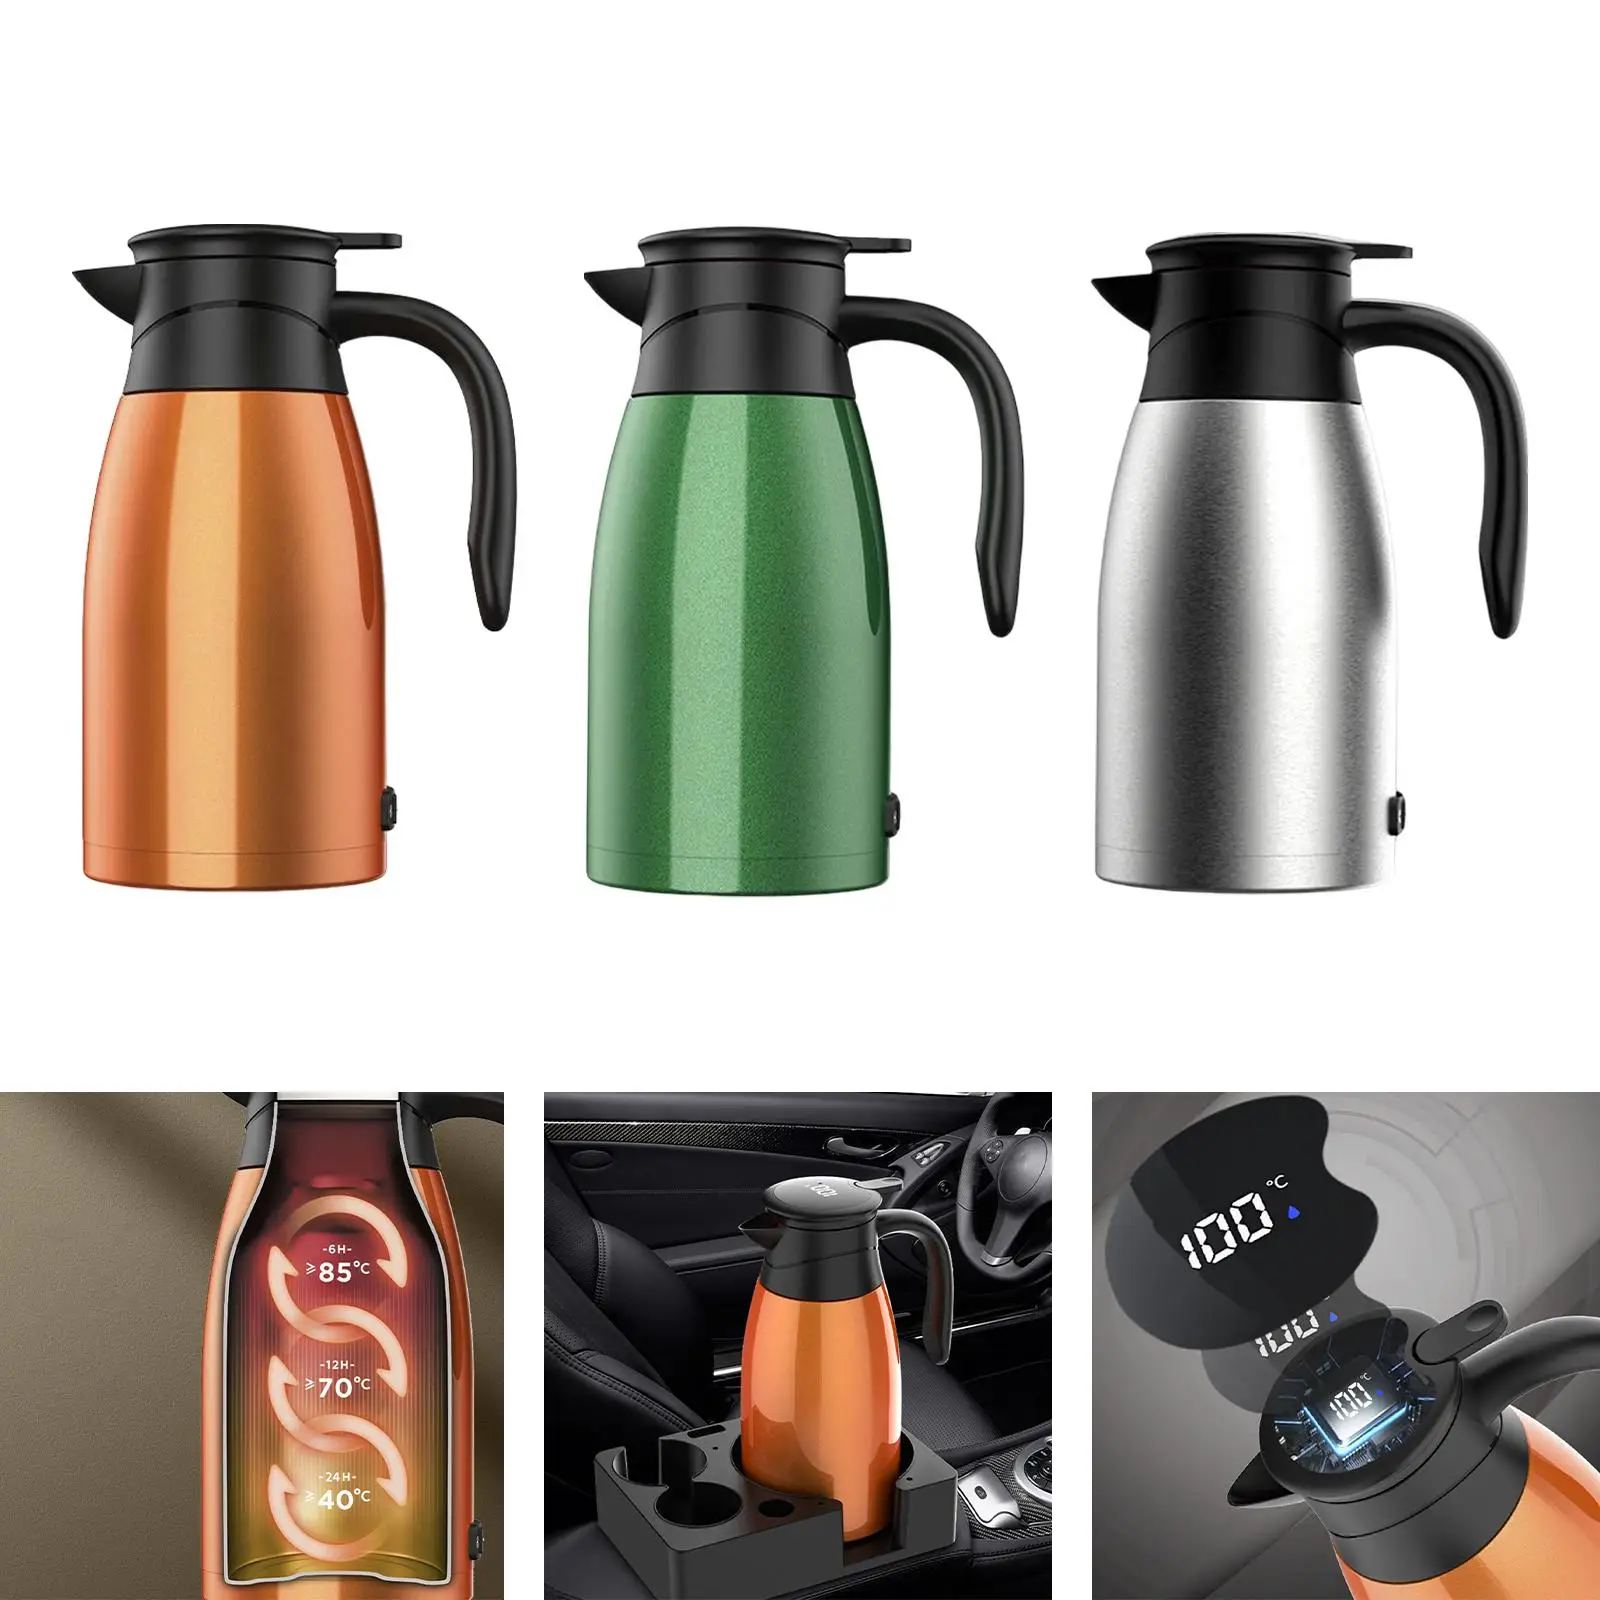 12V Portable Car Kettle, Smart Water Heater with Temperature Display, Insulated